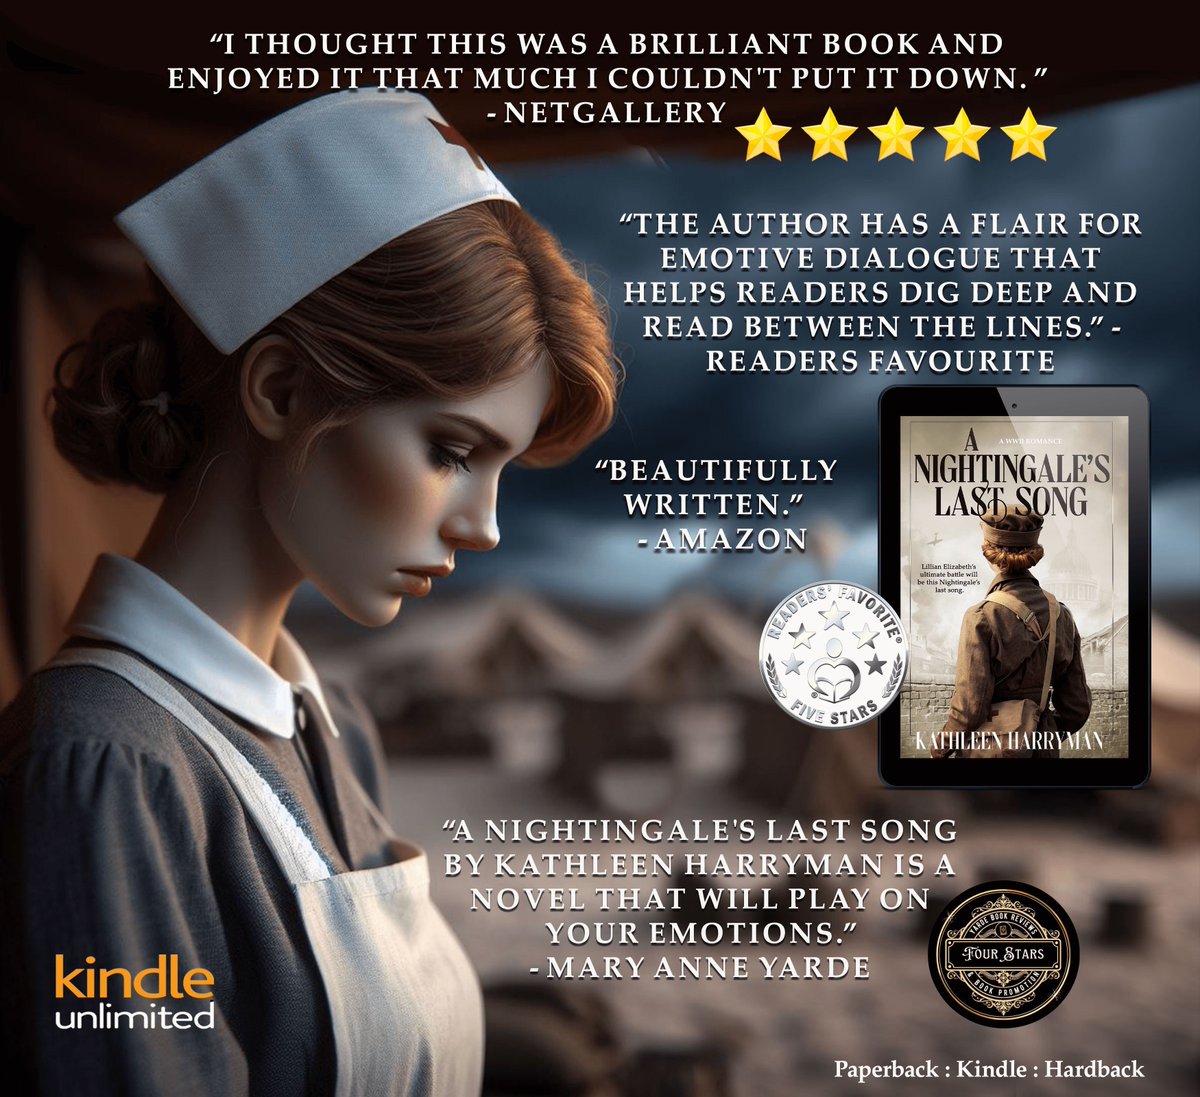 #BookReview 'A Nightingale's Last Song by Kathleen Harryman is a novel that will play on your emotions.' #KU #Kindle #Paperback #Hardback buff.ly/4bcvxHs #HistoricalFiction #HistoricalRomance #HistFic #Romance #BooksWorthReading #BookBoost #WWII #IARTG #KindleUnlimited